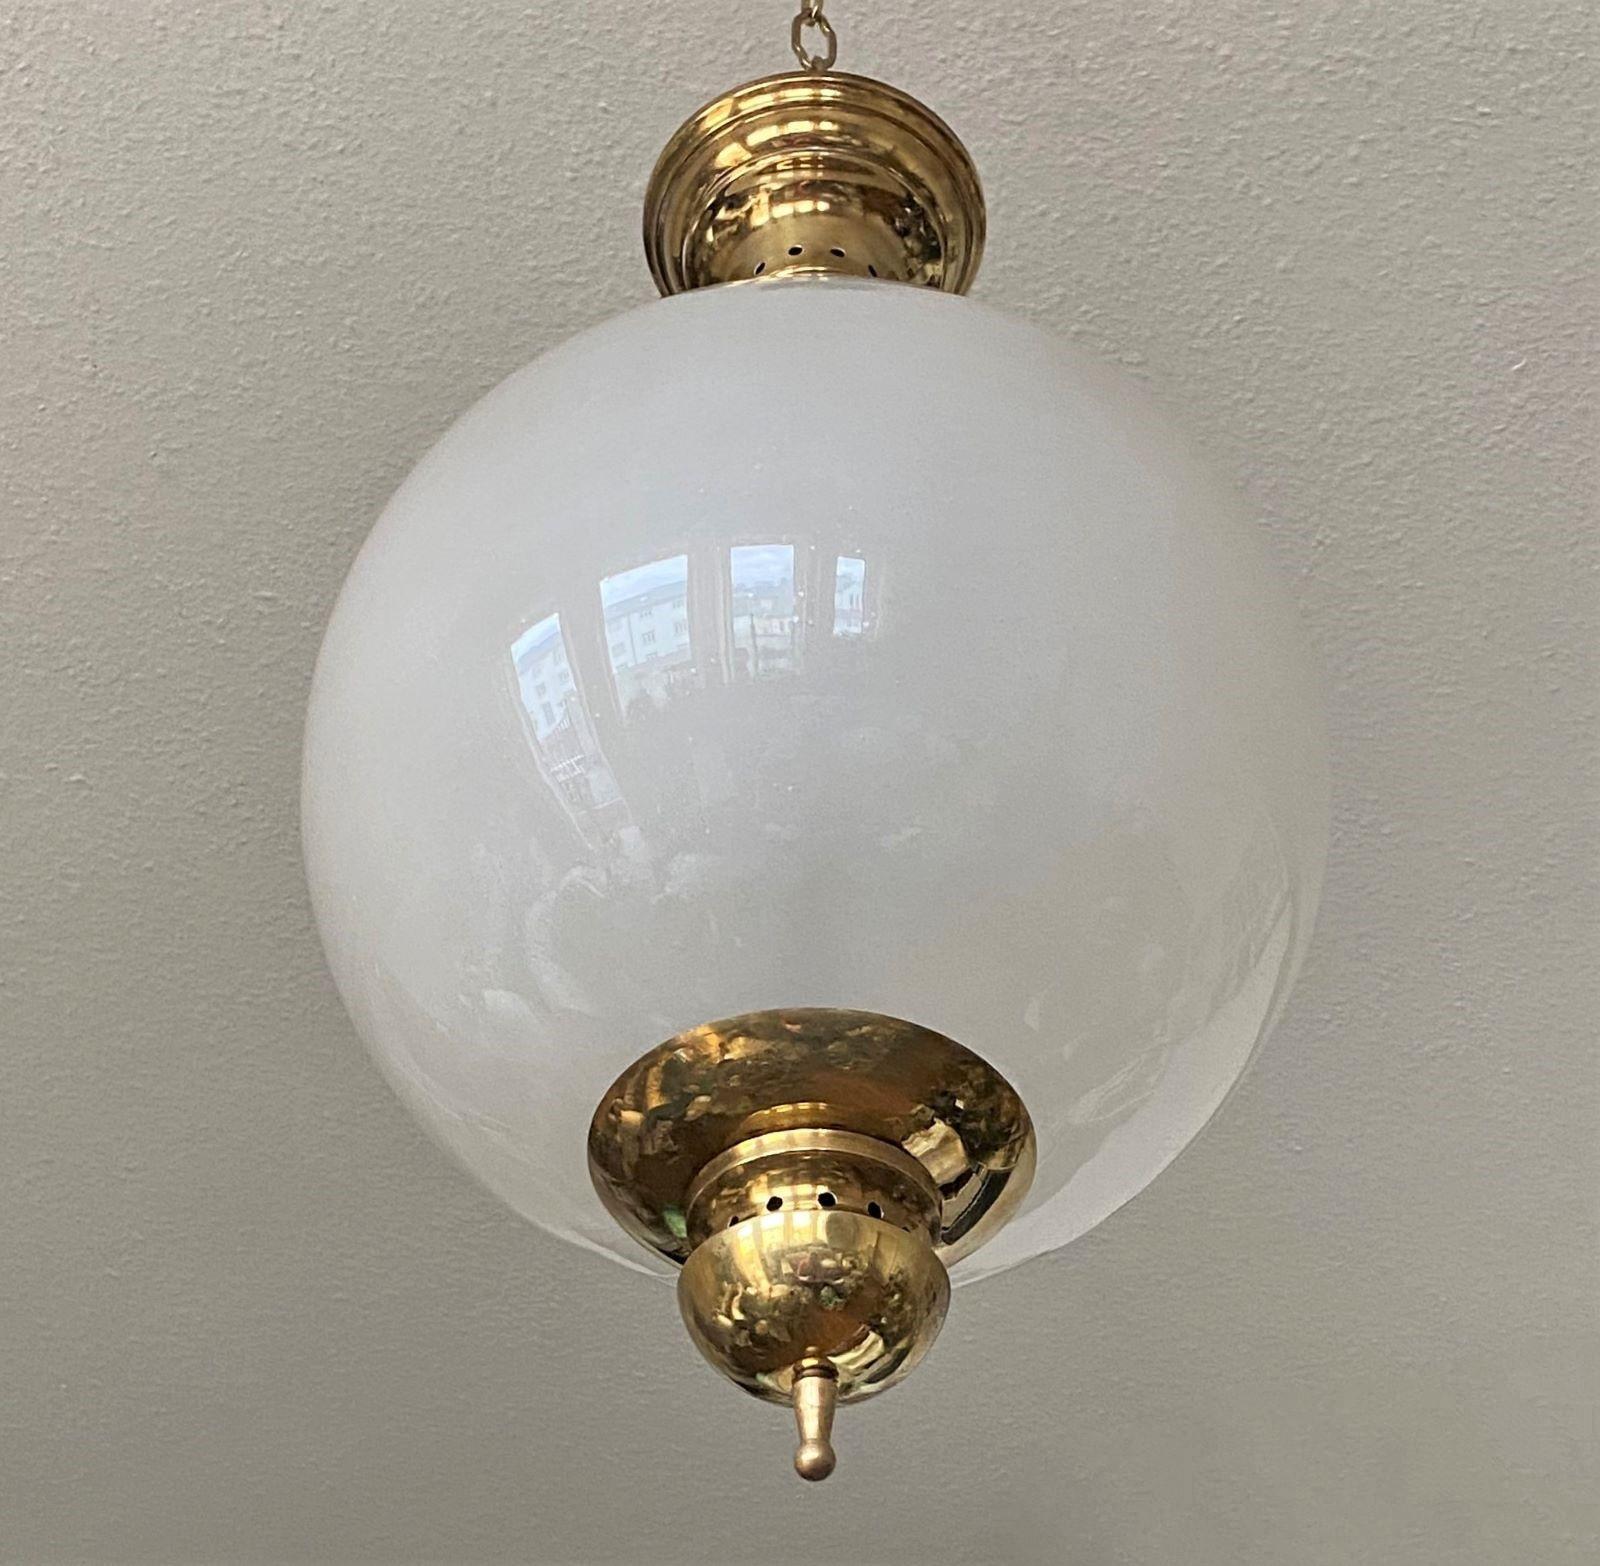 Large Azucena Murano Opalescent Glass Globe Brass Thee-Light Pendant Italy 1950s For Sale 2